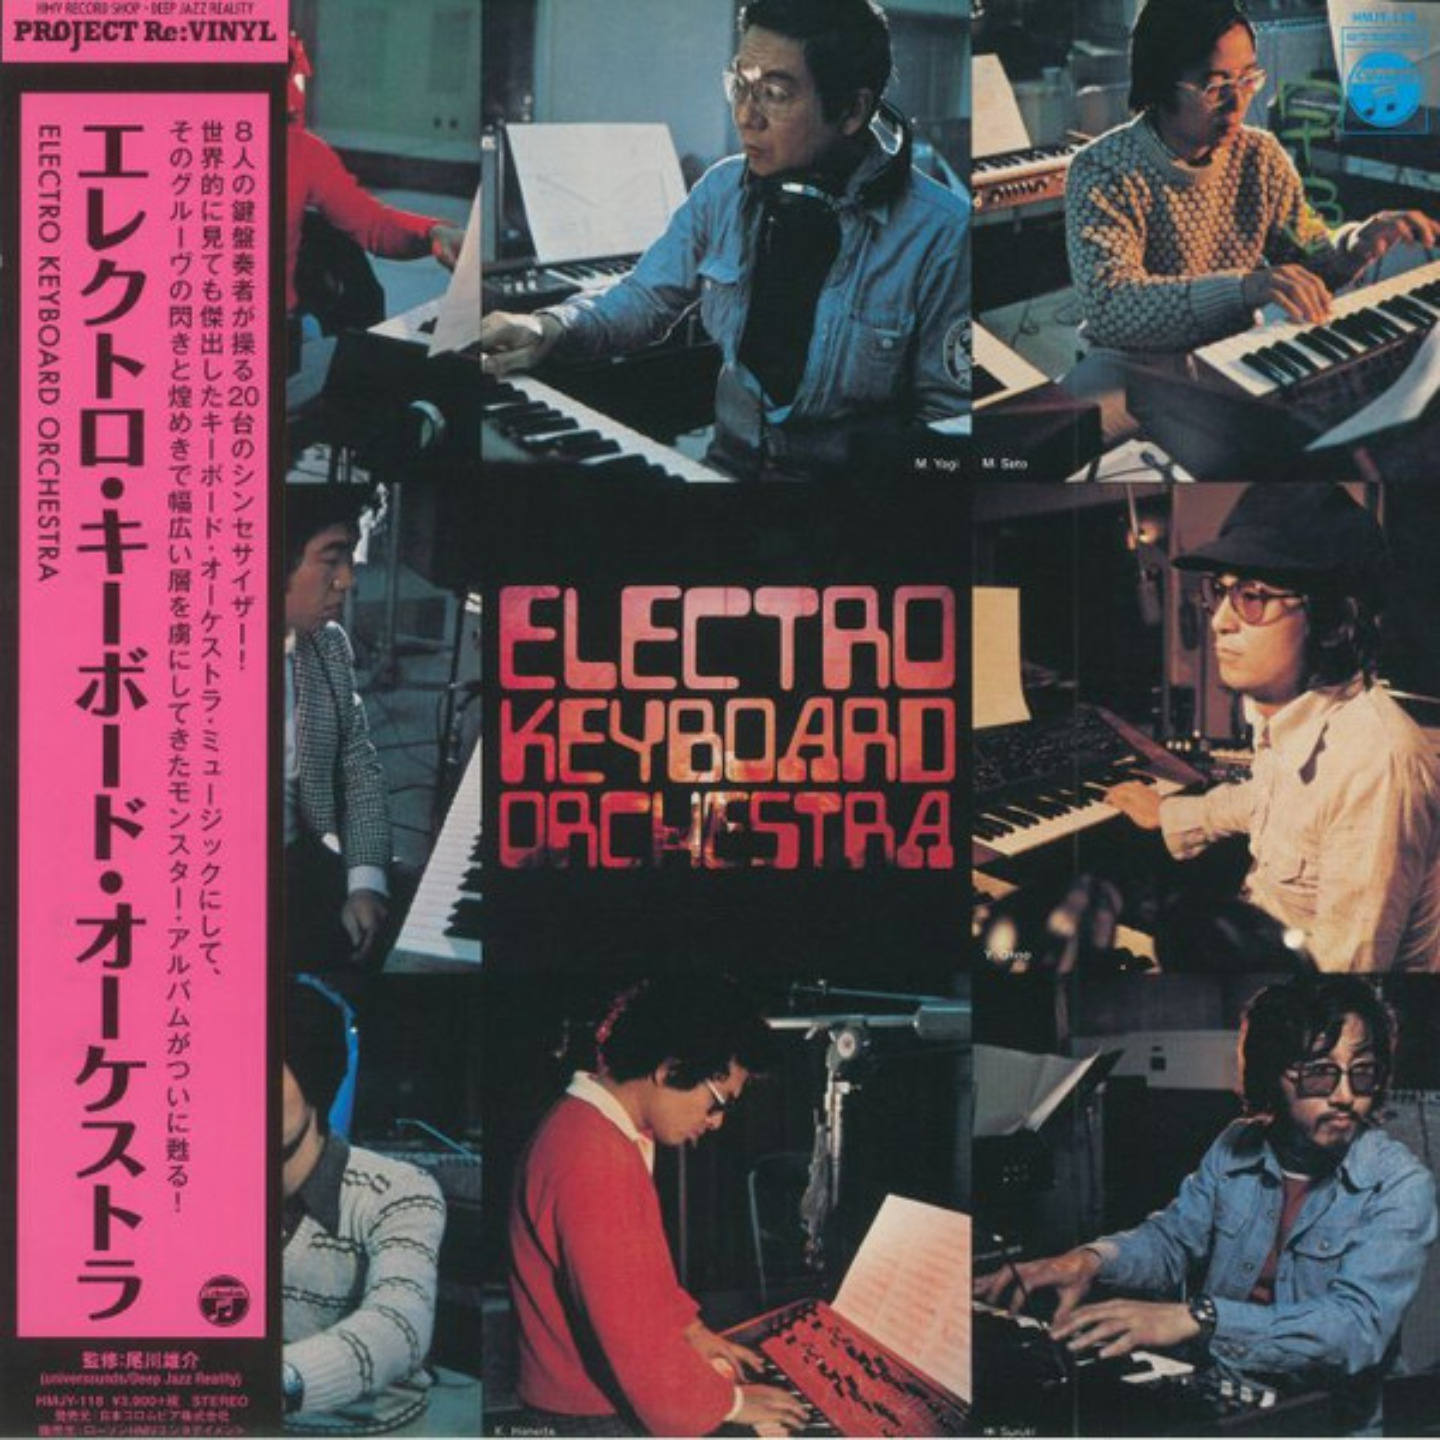 ELECTRO KEYBOARD ORCHESTRA - Electro Keyboard Orchestra LP (Clear Vinyl)